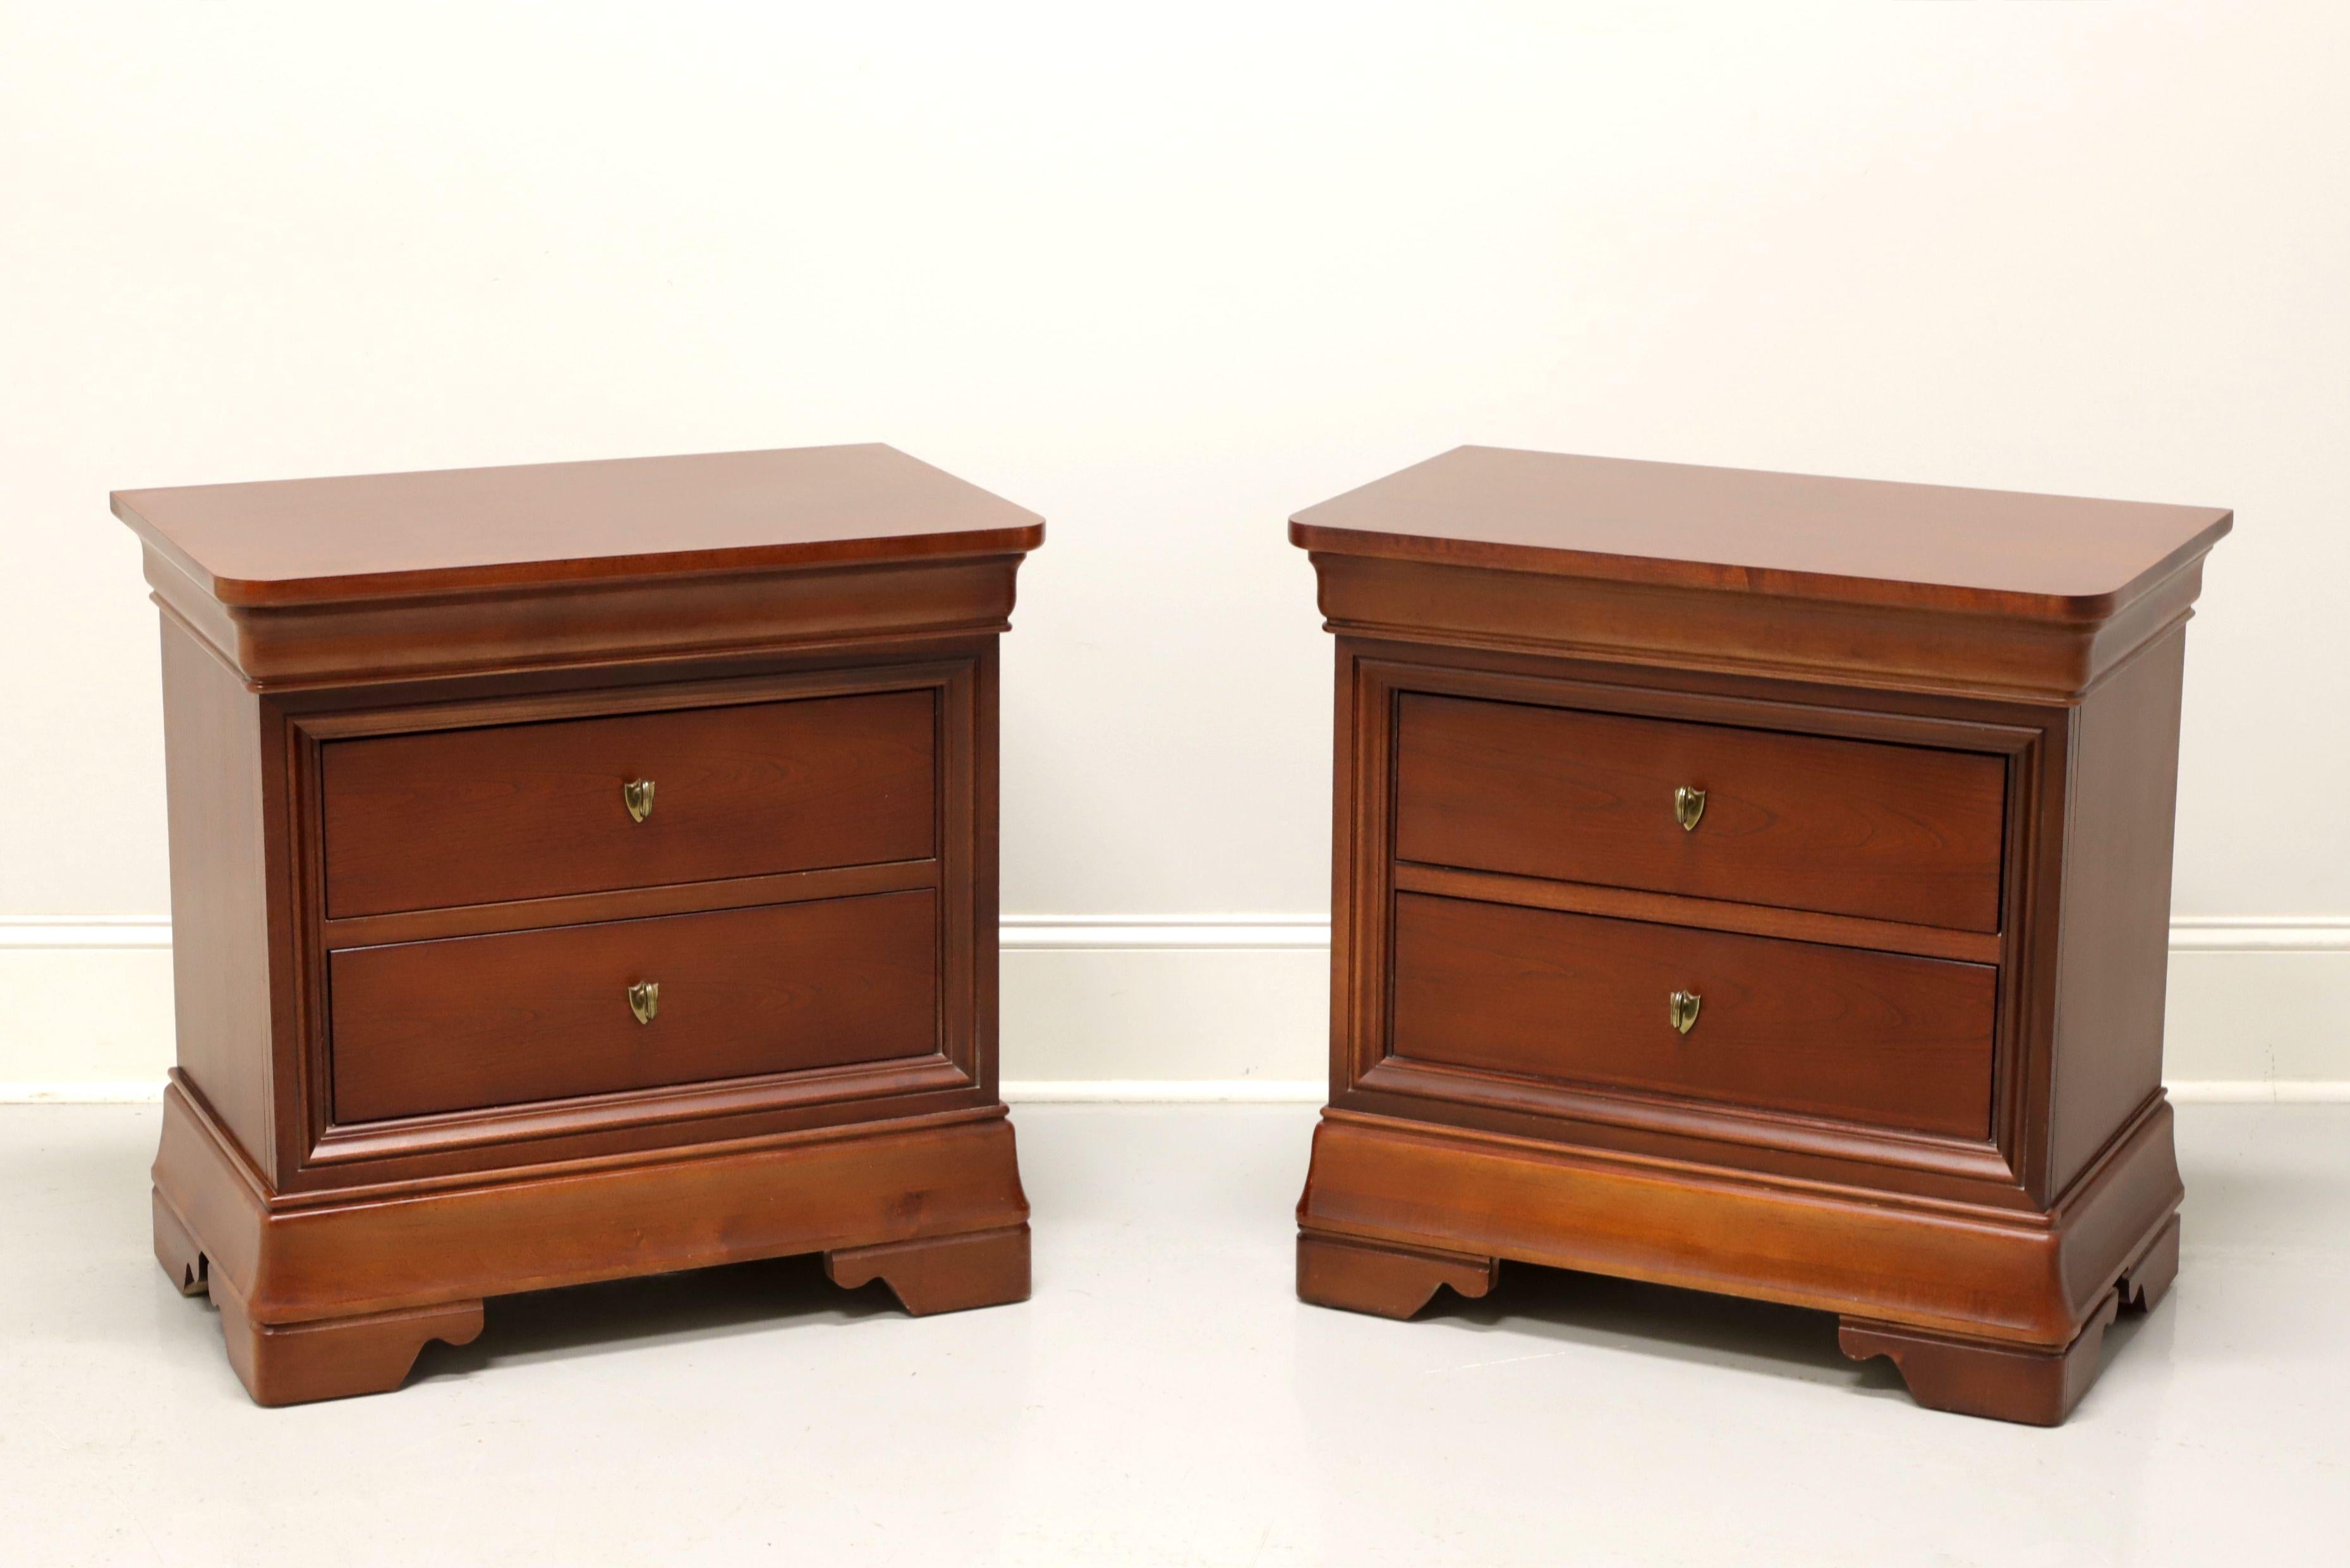 THOMASVILLE Impressions Martinique Louis Phillippe Cherry Nightstands - Pair 4